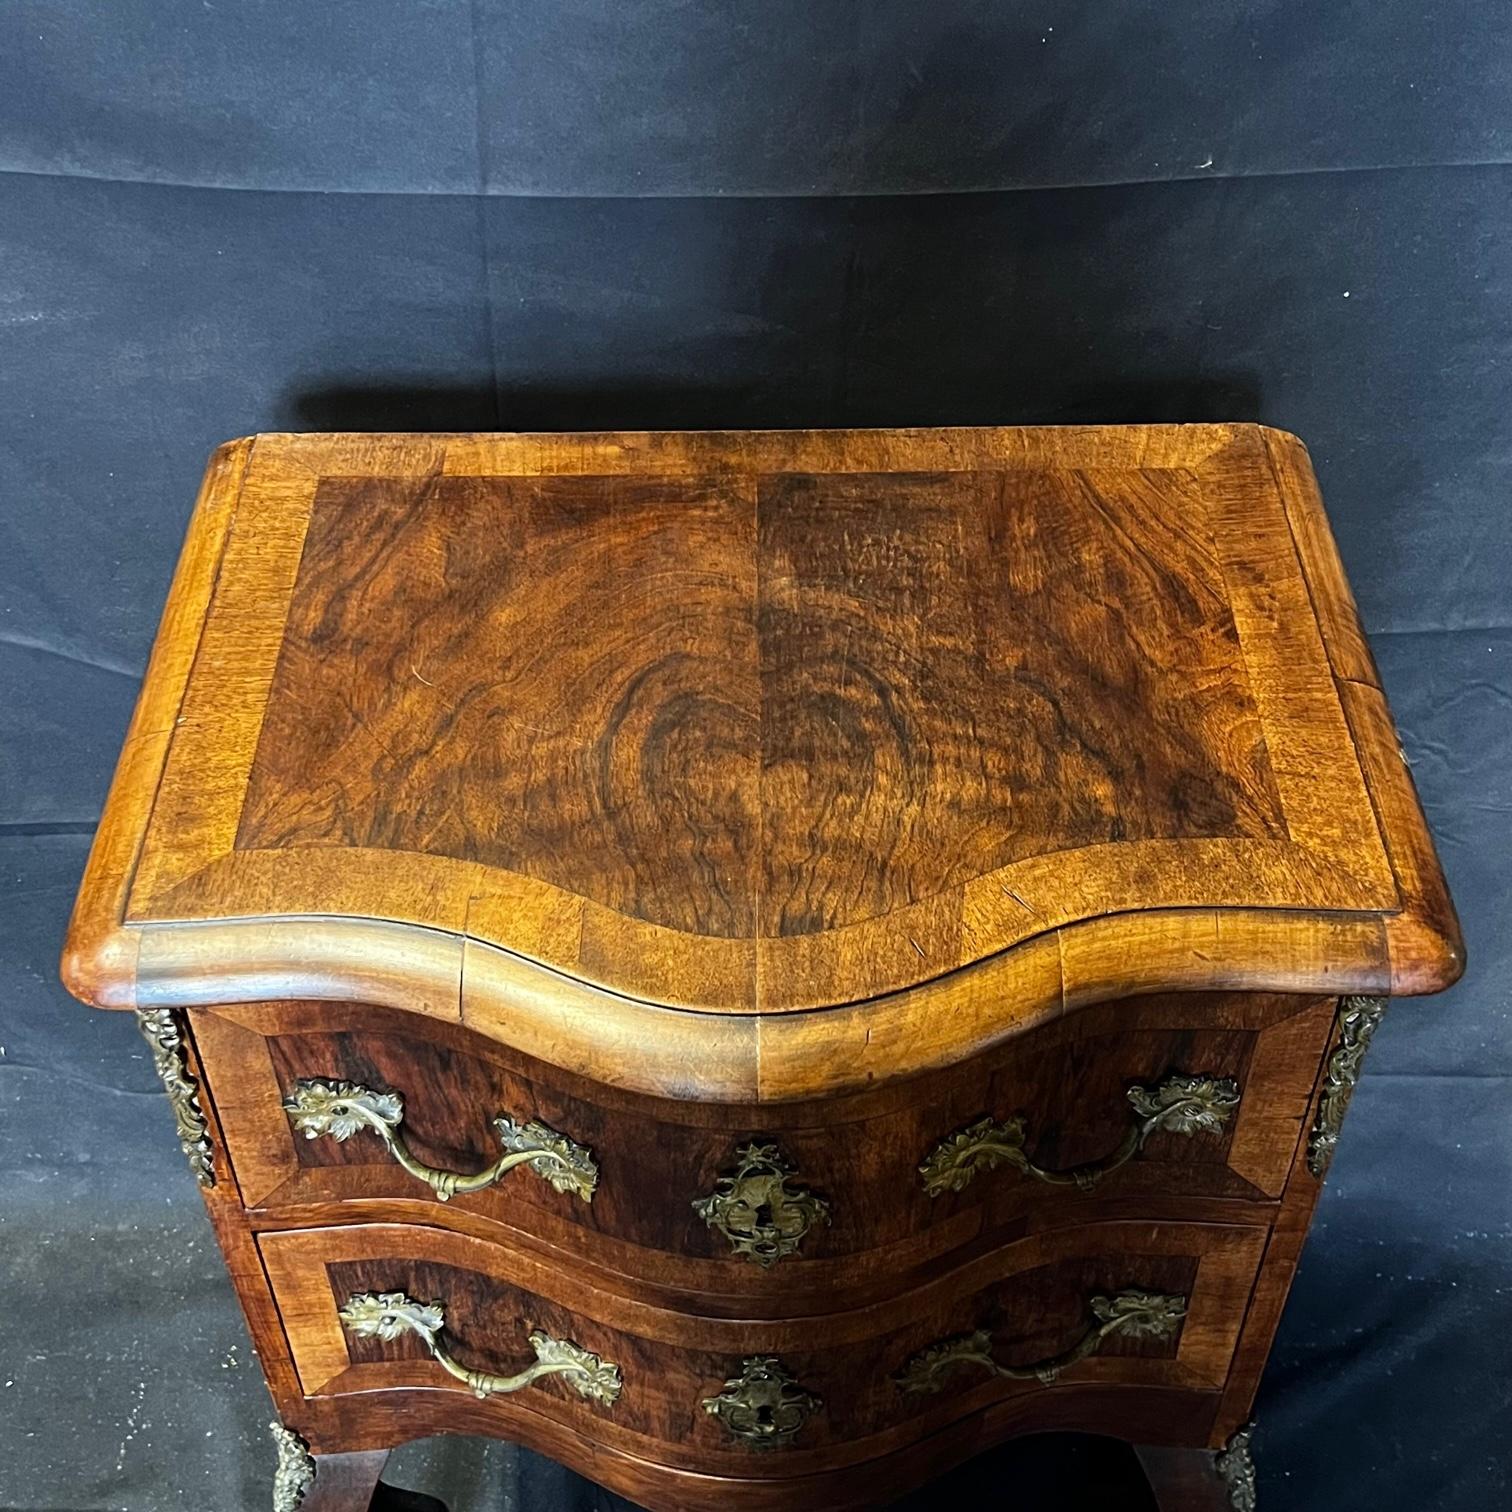 Small French chest of drawers, full Louis XV period, fantastic wood texture, excellent quality, inlaid burlwood panels on the 2 drawers and lovely grains that highlight the beauty of this quality of wood. The cabriole legs are an elegant flourish. 